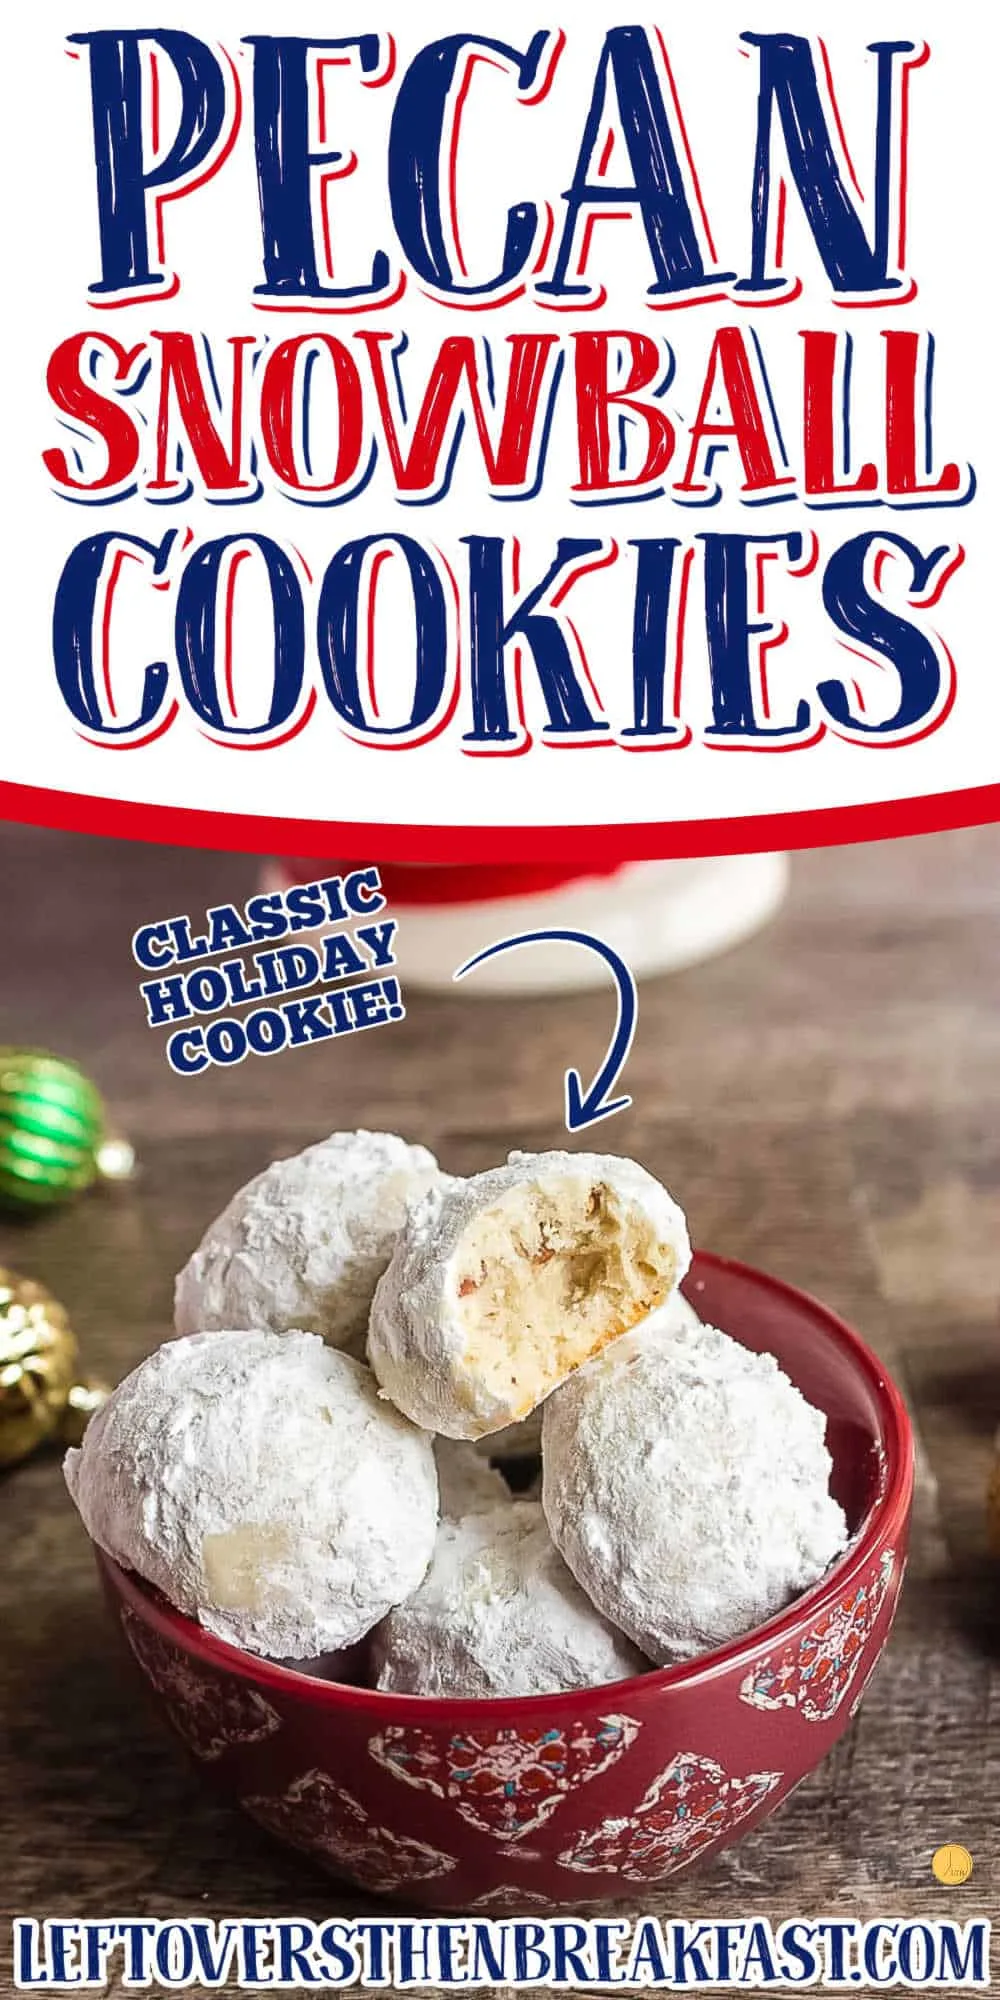 collage with text "pecan snowball cookies"